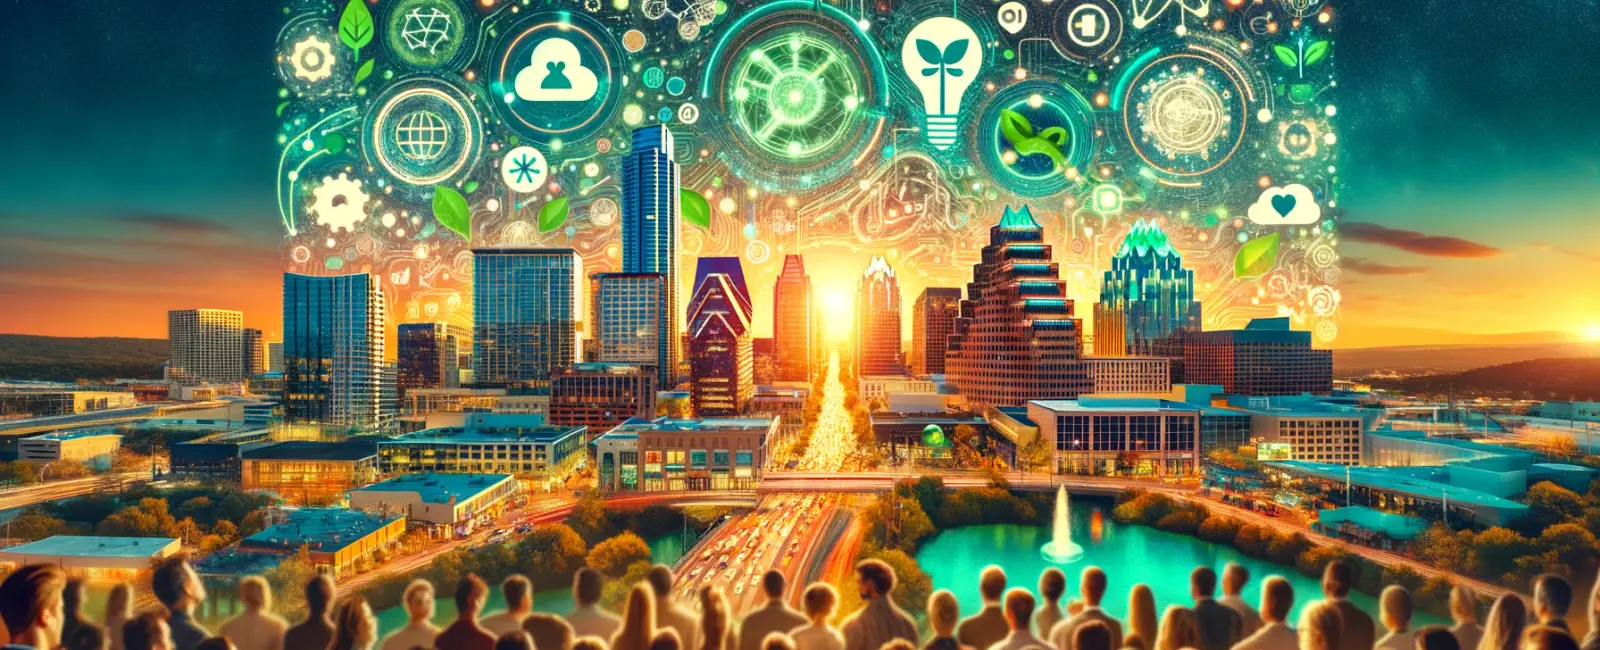 Let's Connect at SXSW: Driving Change in AI and Sustainability